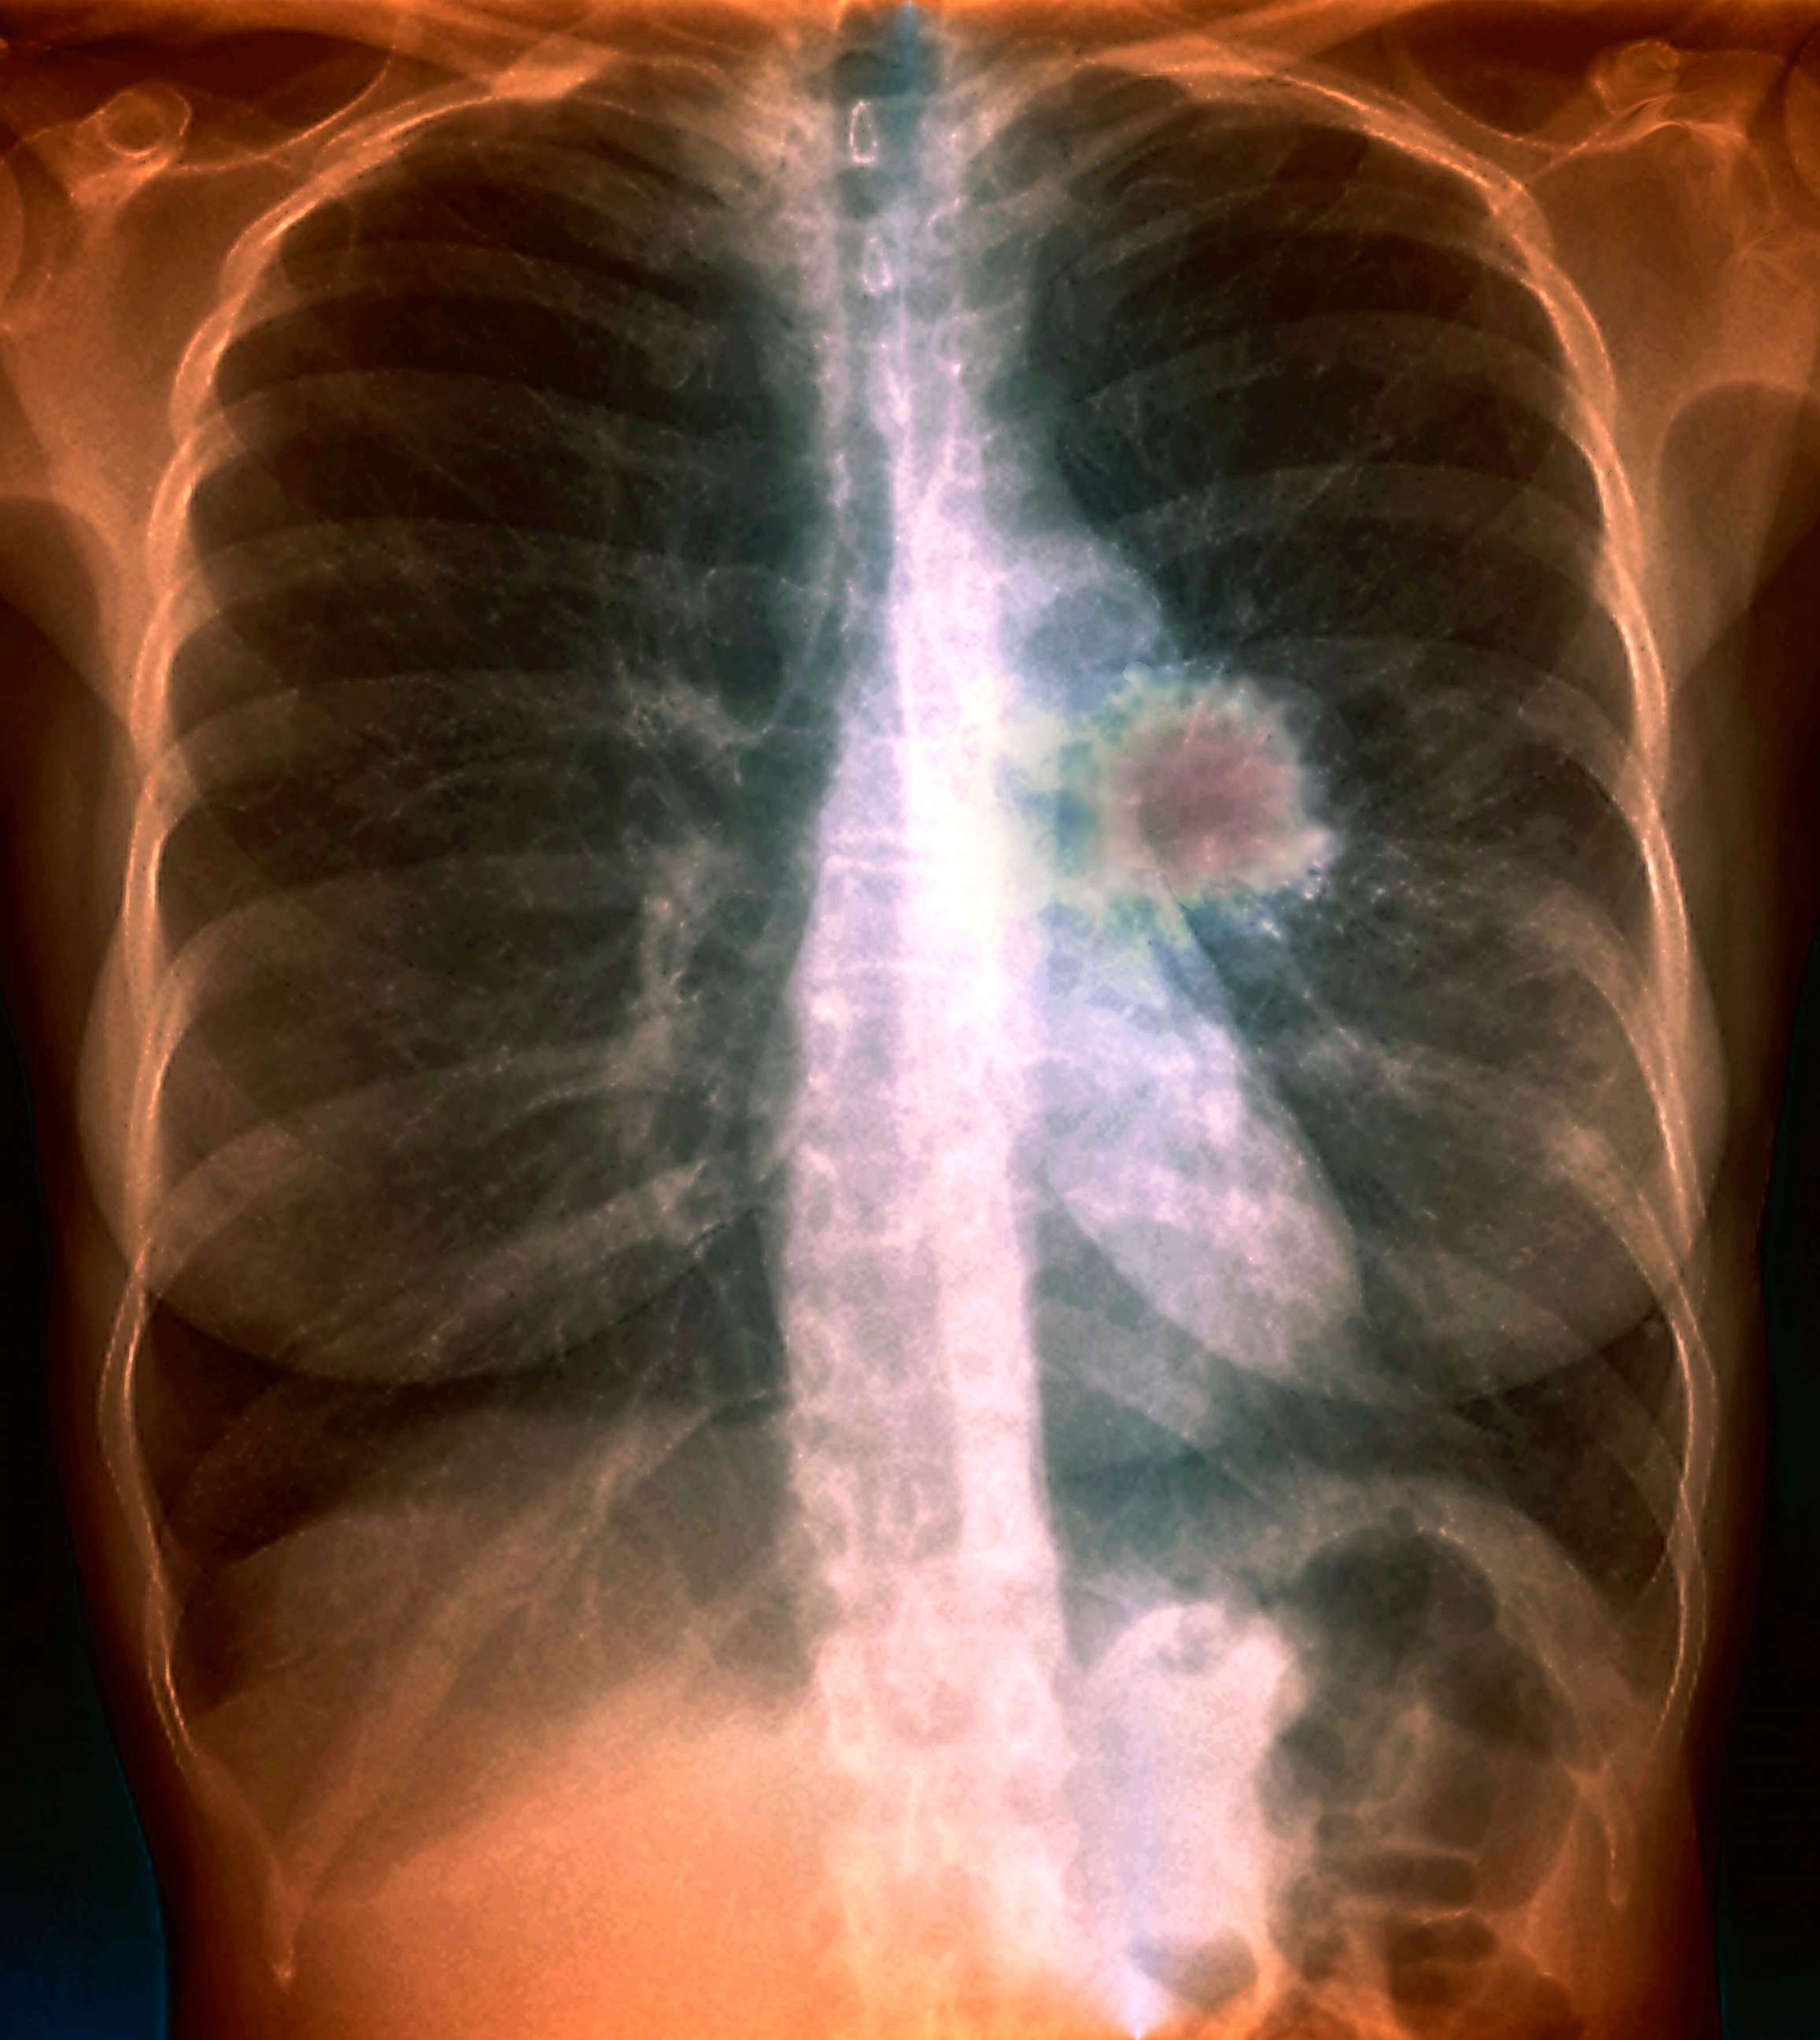 PHOTO: An x-ray showing lung cancer.